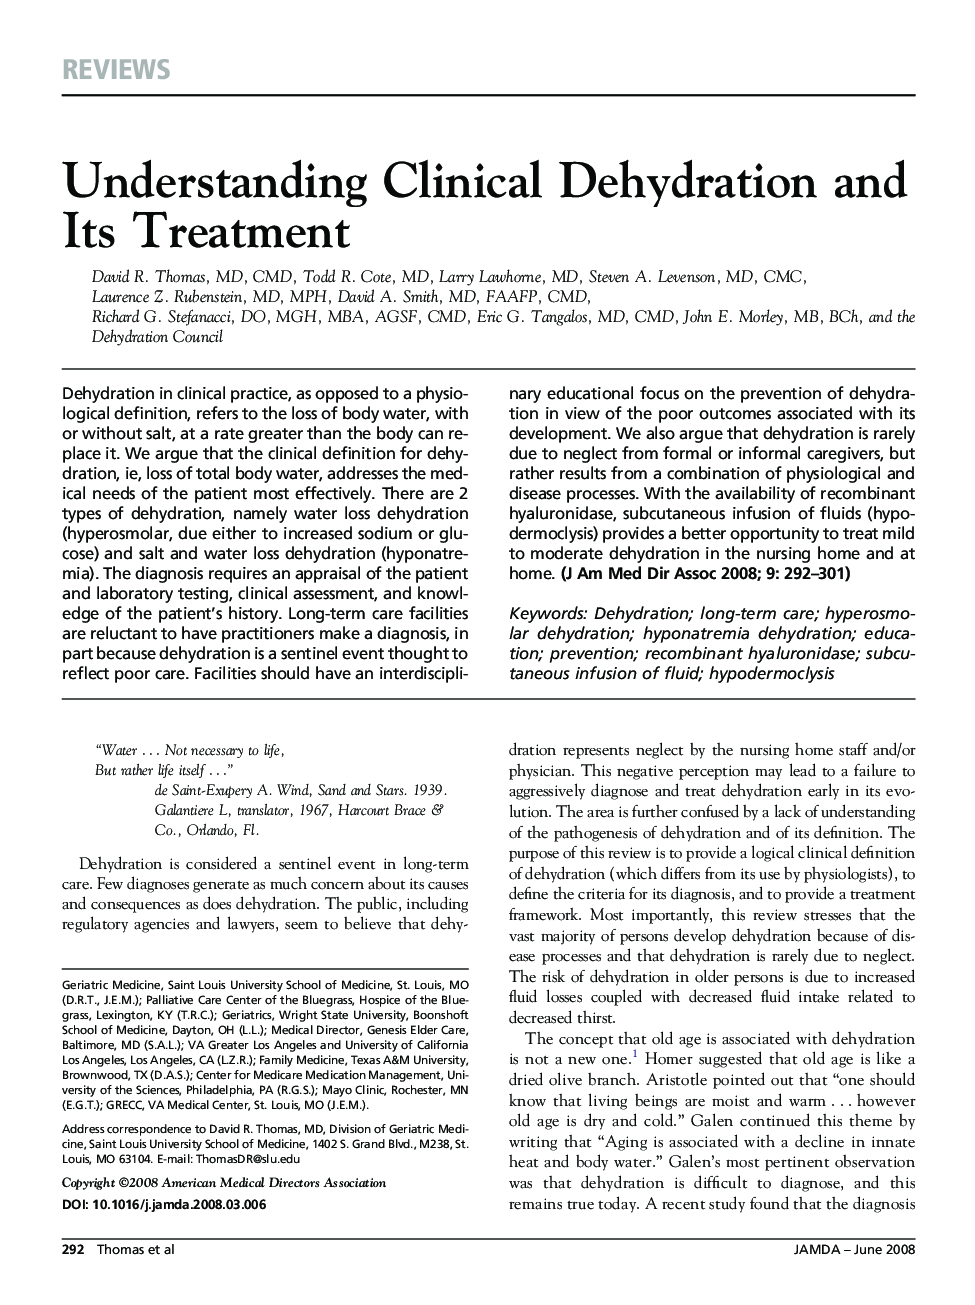 Understanding Clinical Dehydration and Its Treatment